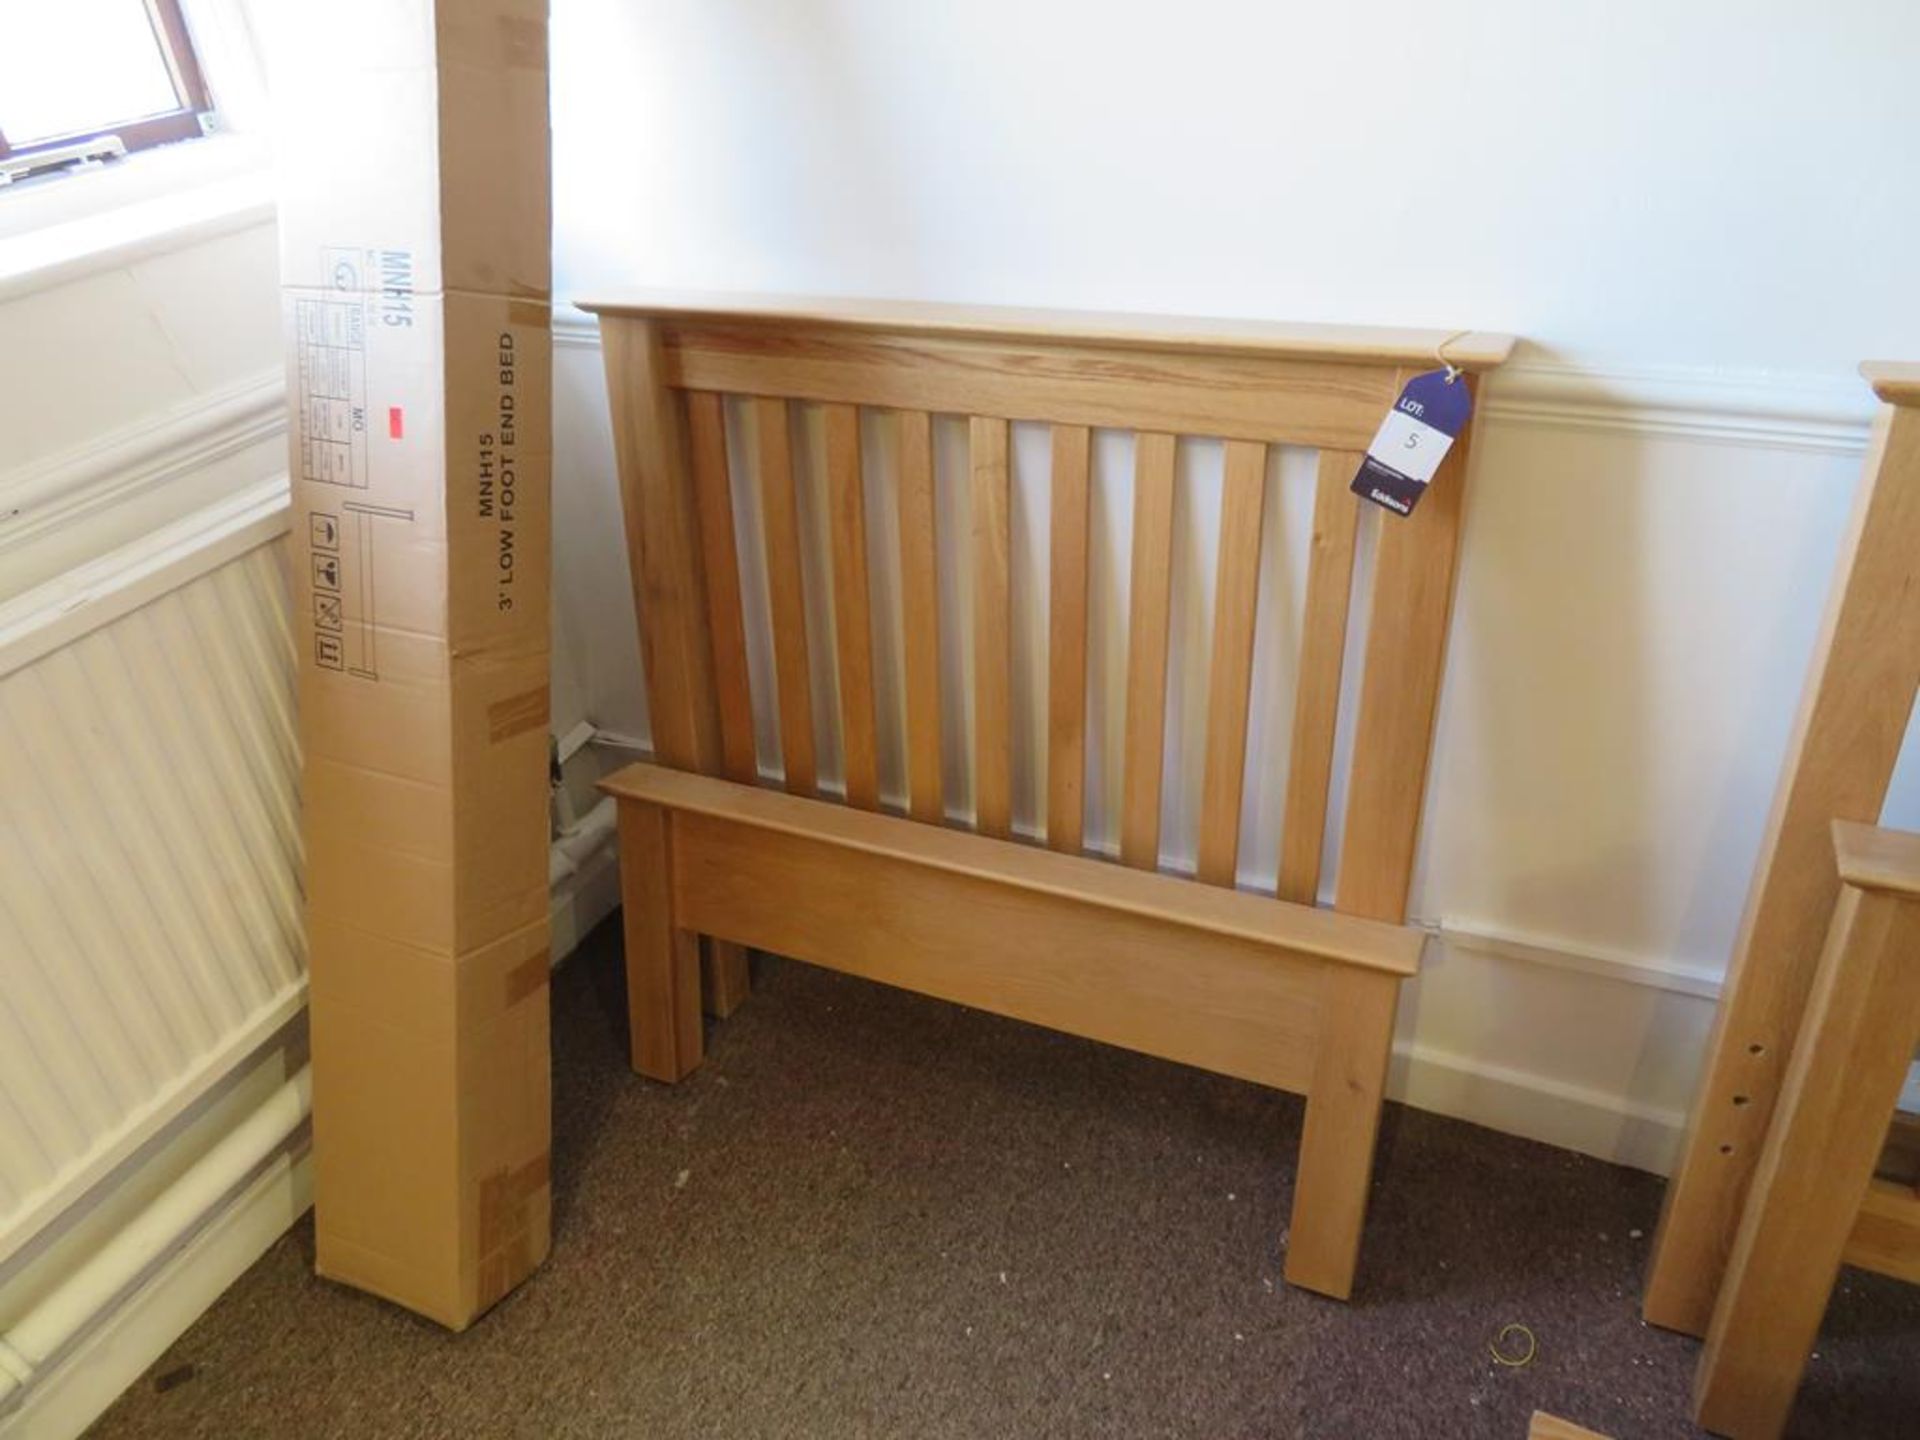 Fortune Wood 3ft Low Foot End Bed Frame - Image 2 of 2